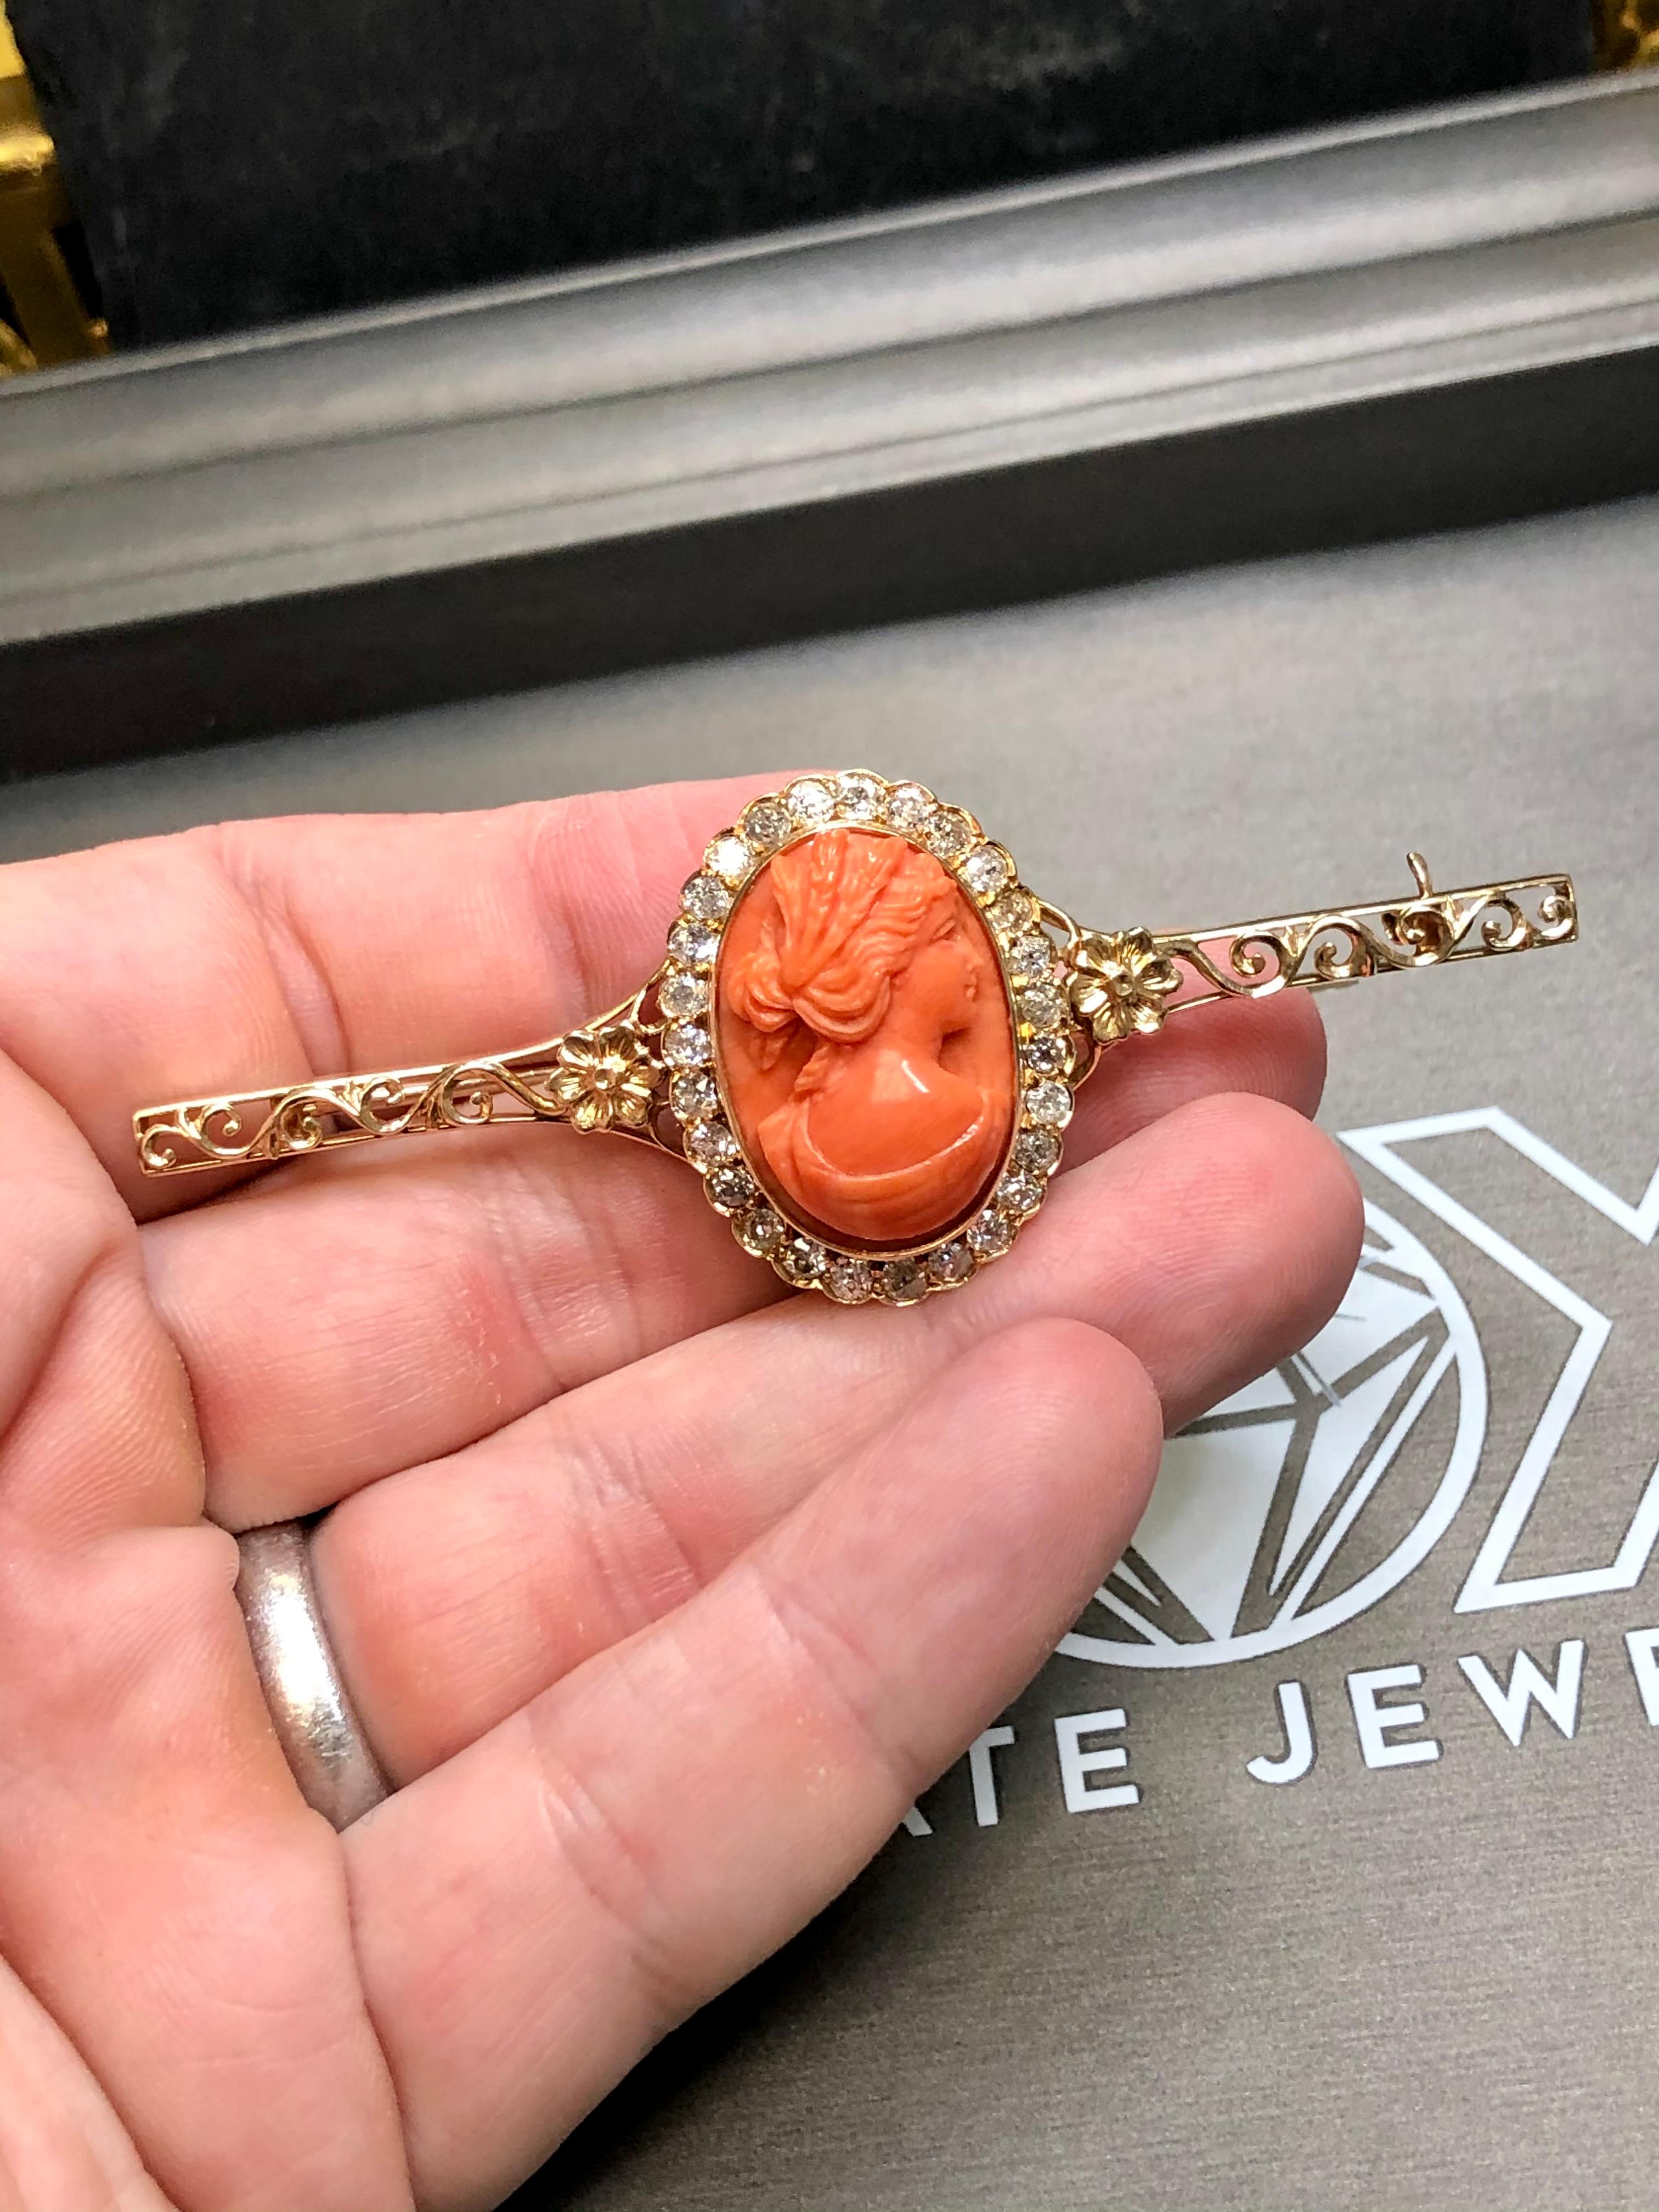 Antique Victorian Mine Cut Diamond Coral Cameo Brooch Pin 2.16cttw In Good Condition For Sale In Winter Springs, FL